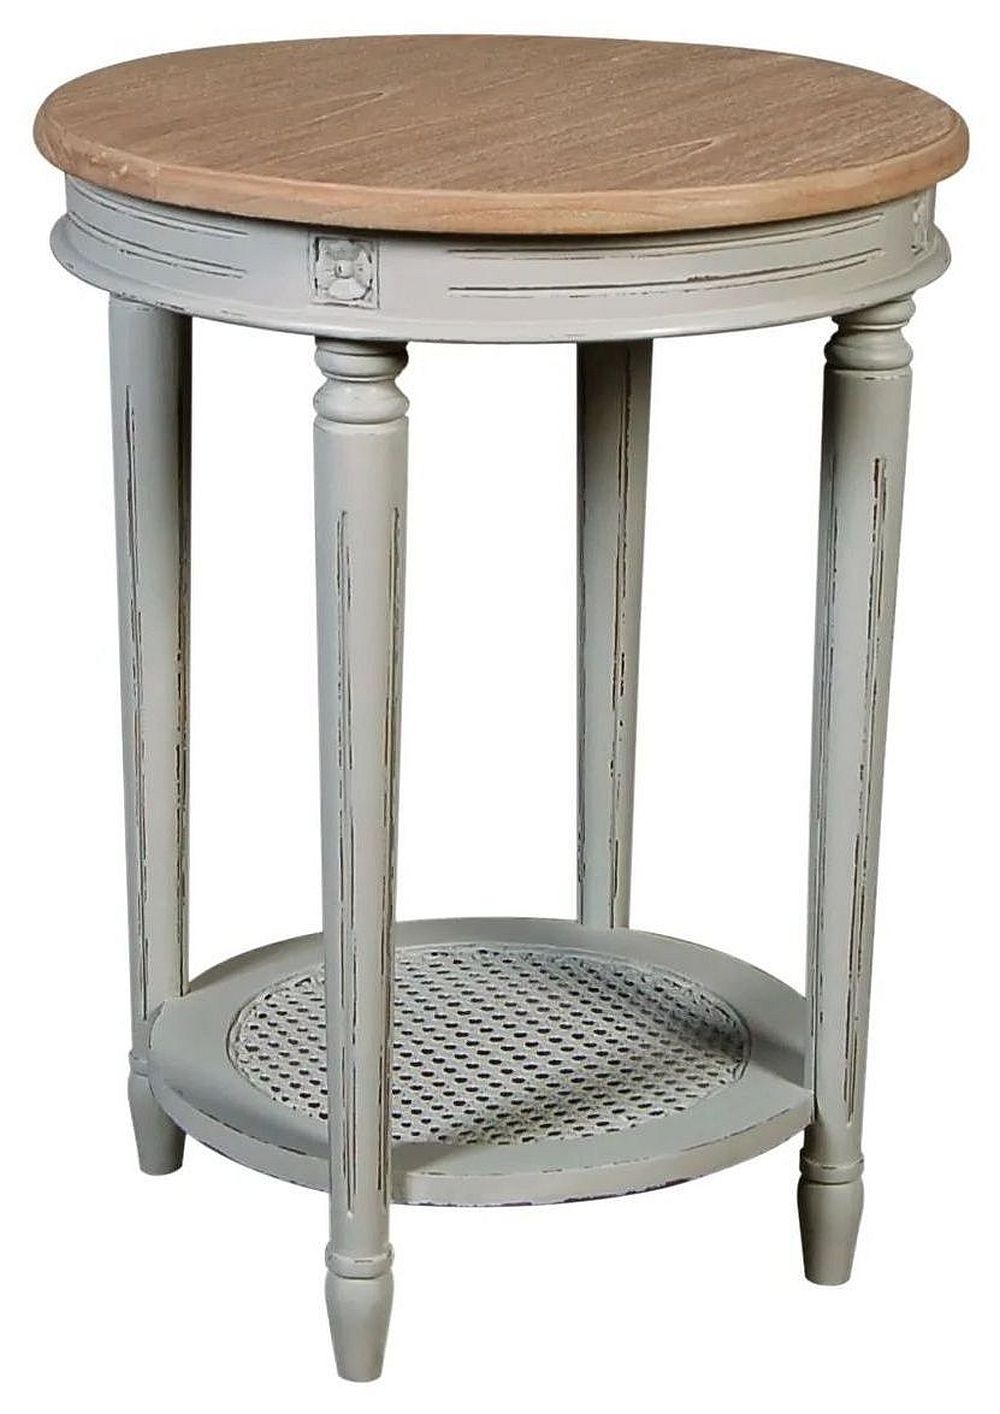 Valerie French Distressed Stone Grey Round Side Table